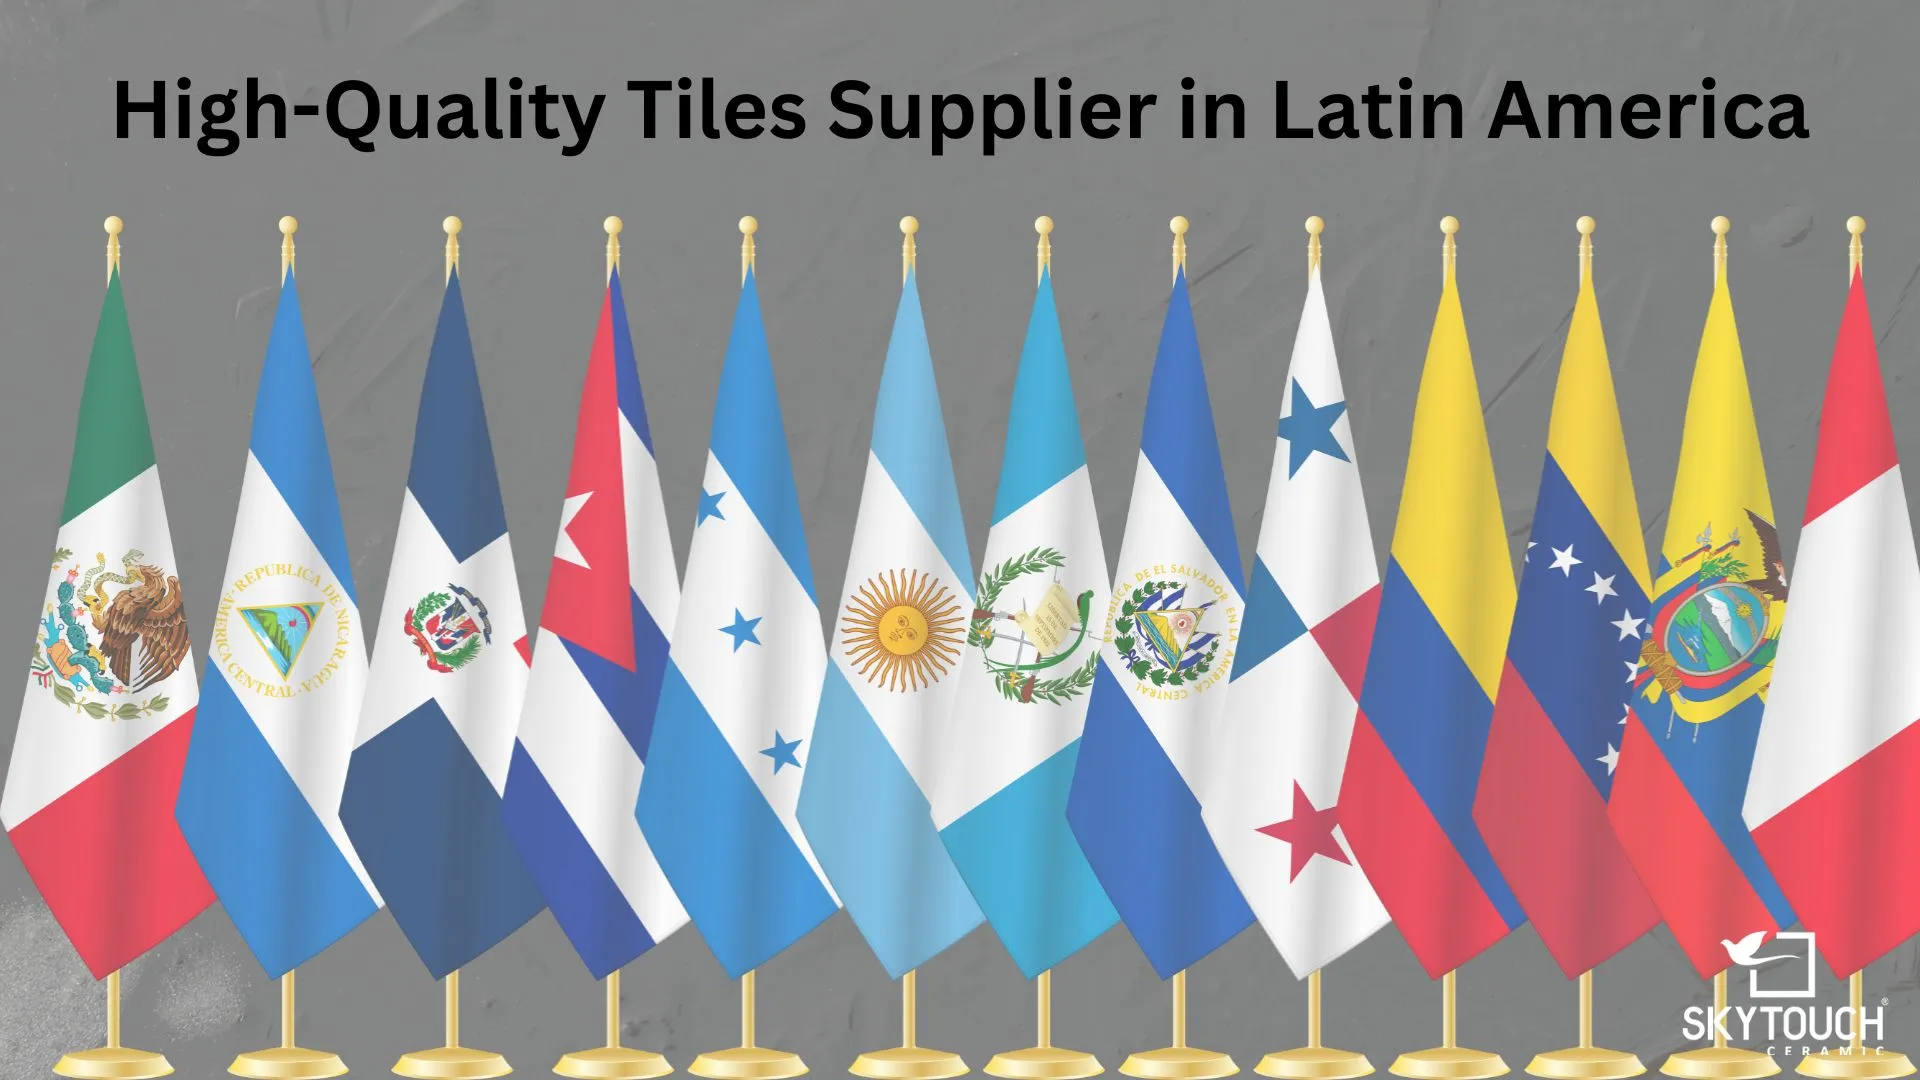 High-Quality Tiles Supplier in Latin America